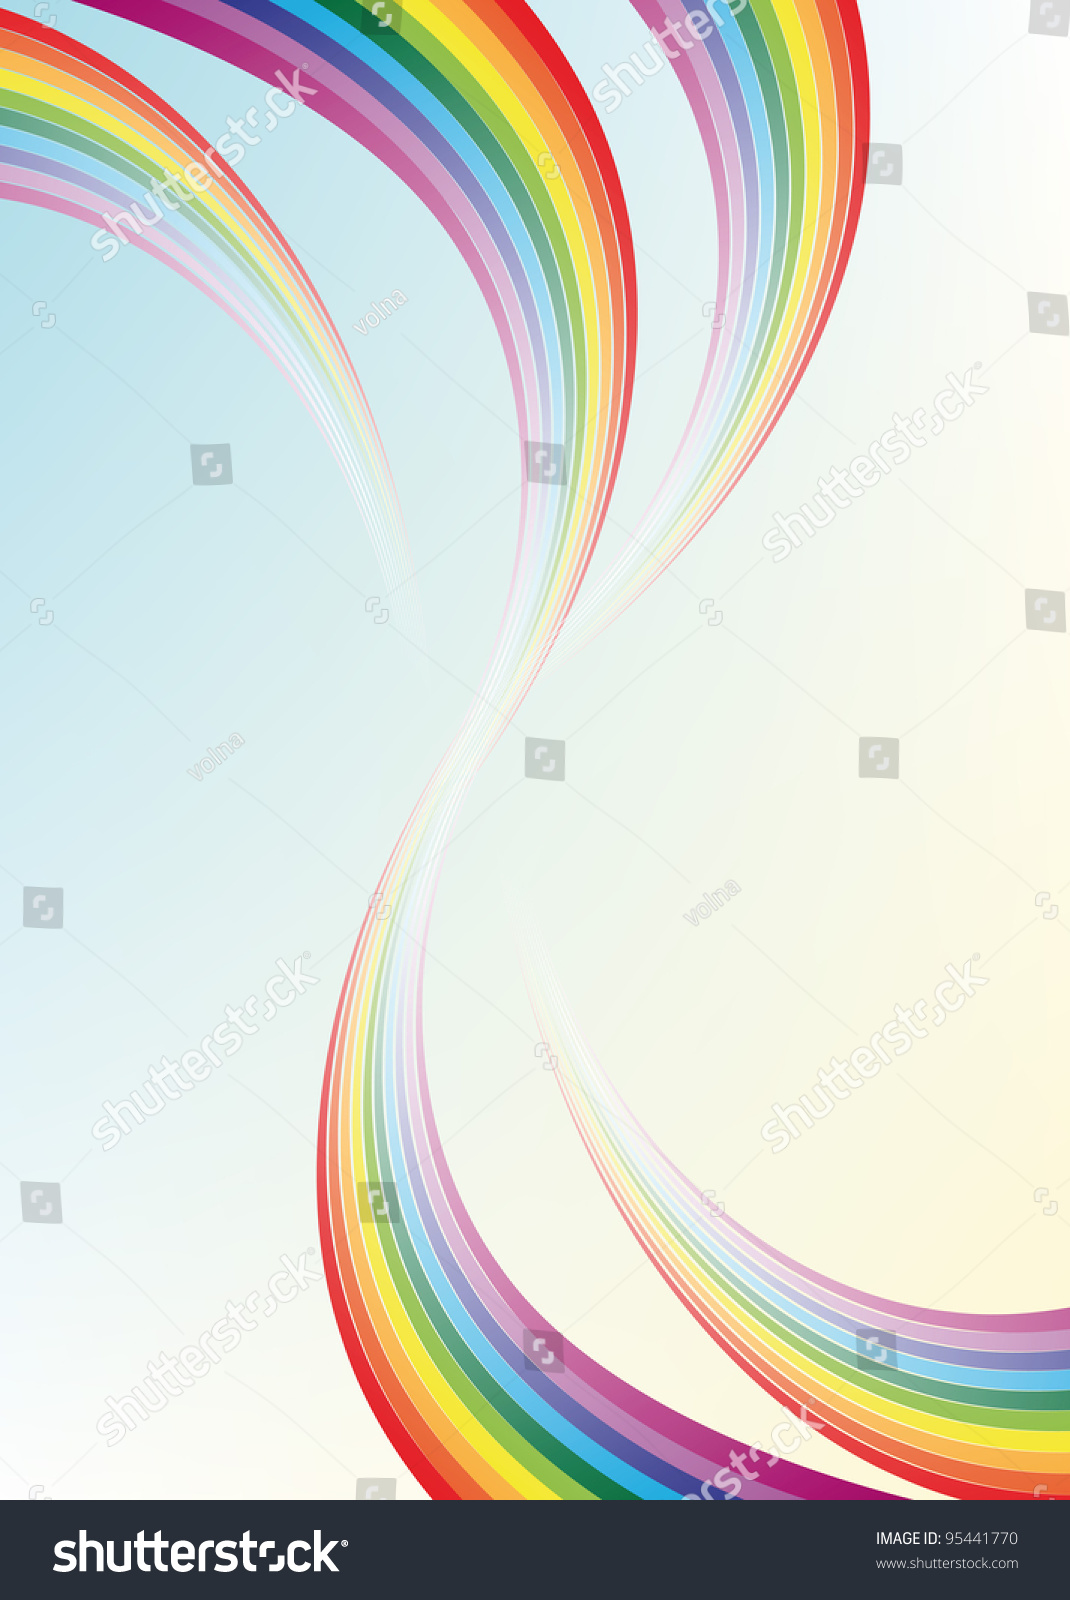 Abstract Background. Multi-Colored Rainbow Stock Vector Illustration ...